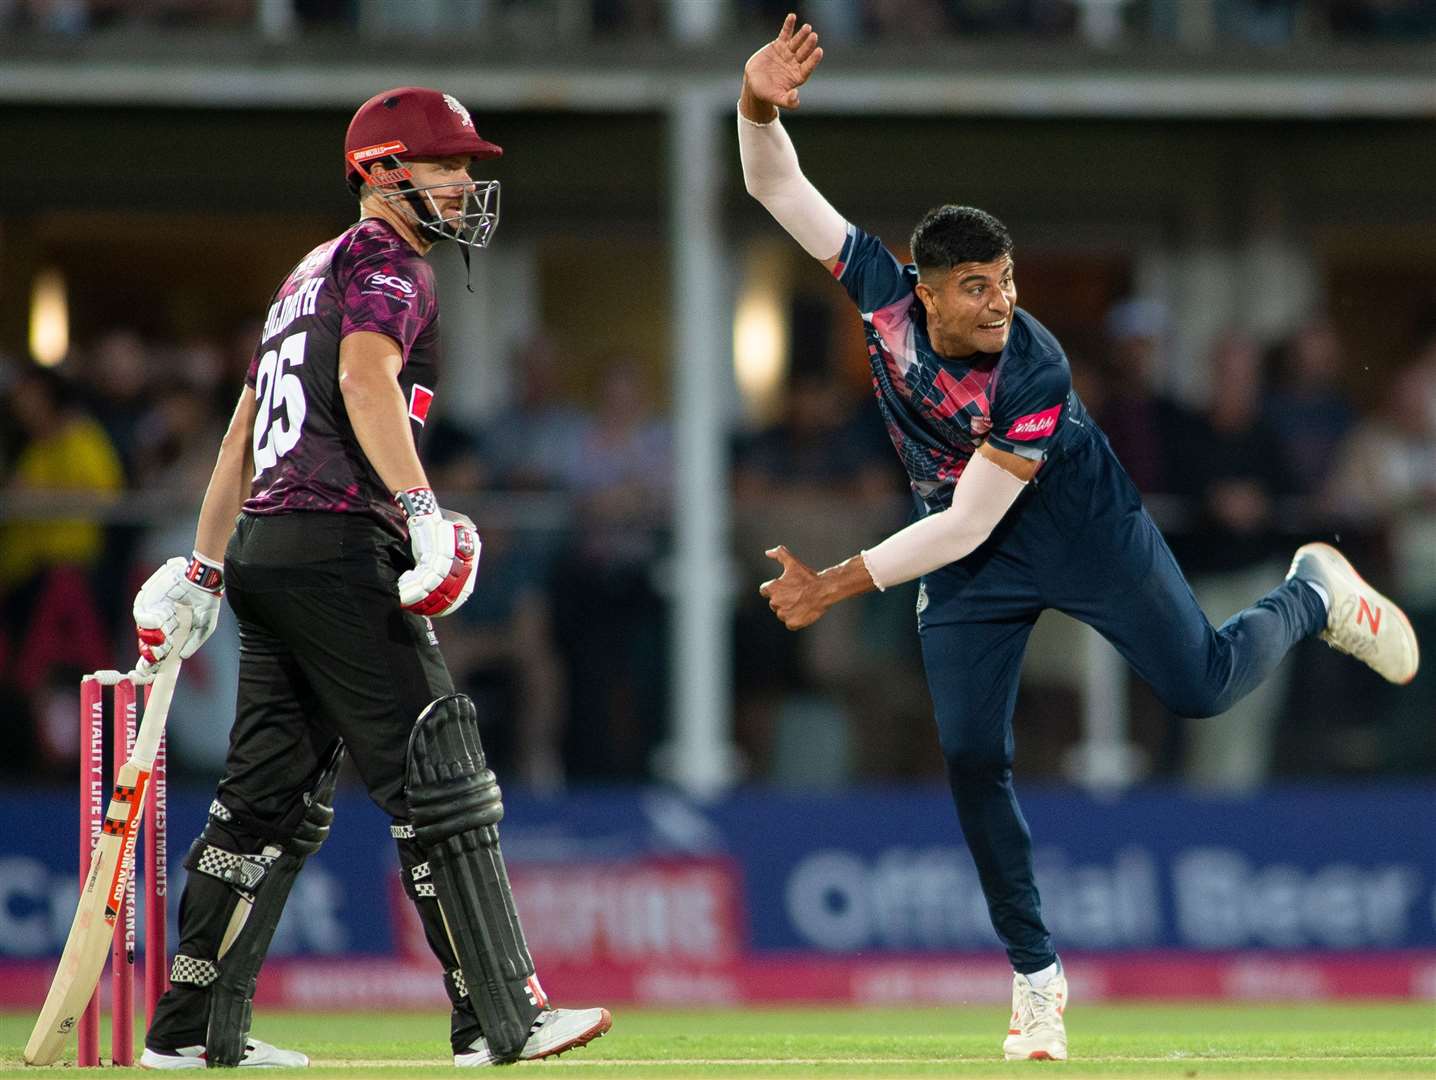 Kent's Imran Qayyum took figures of 5-21 against Somerset. Picture: Ady Kerry